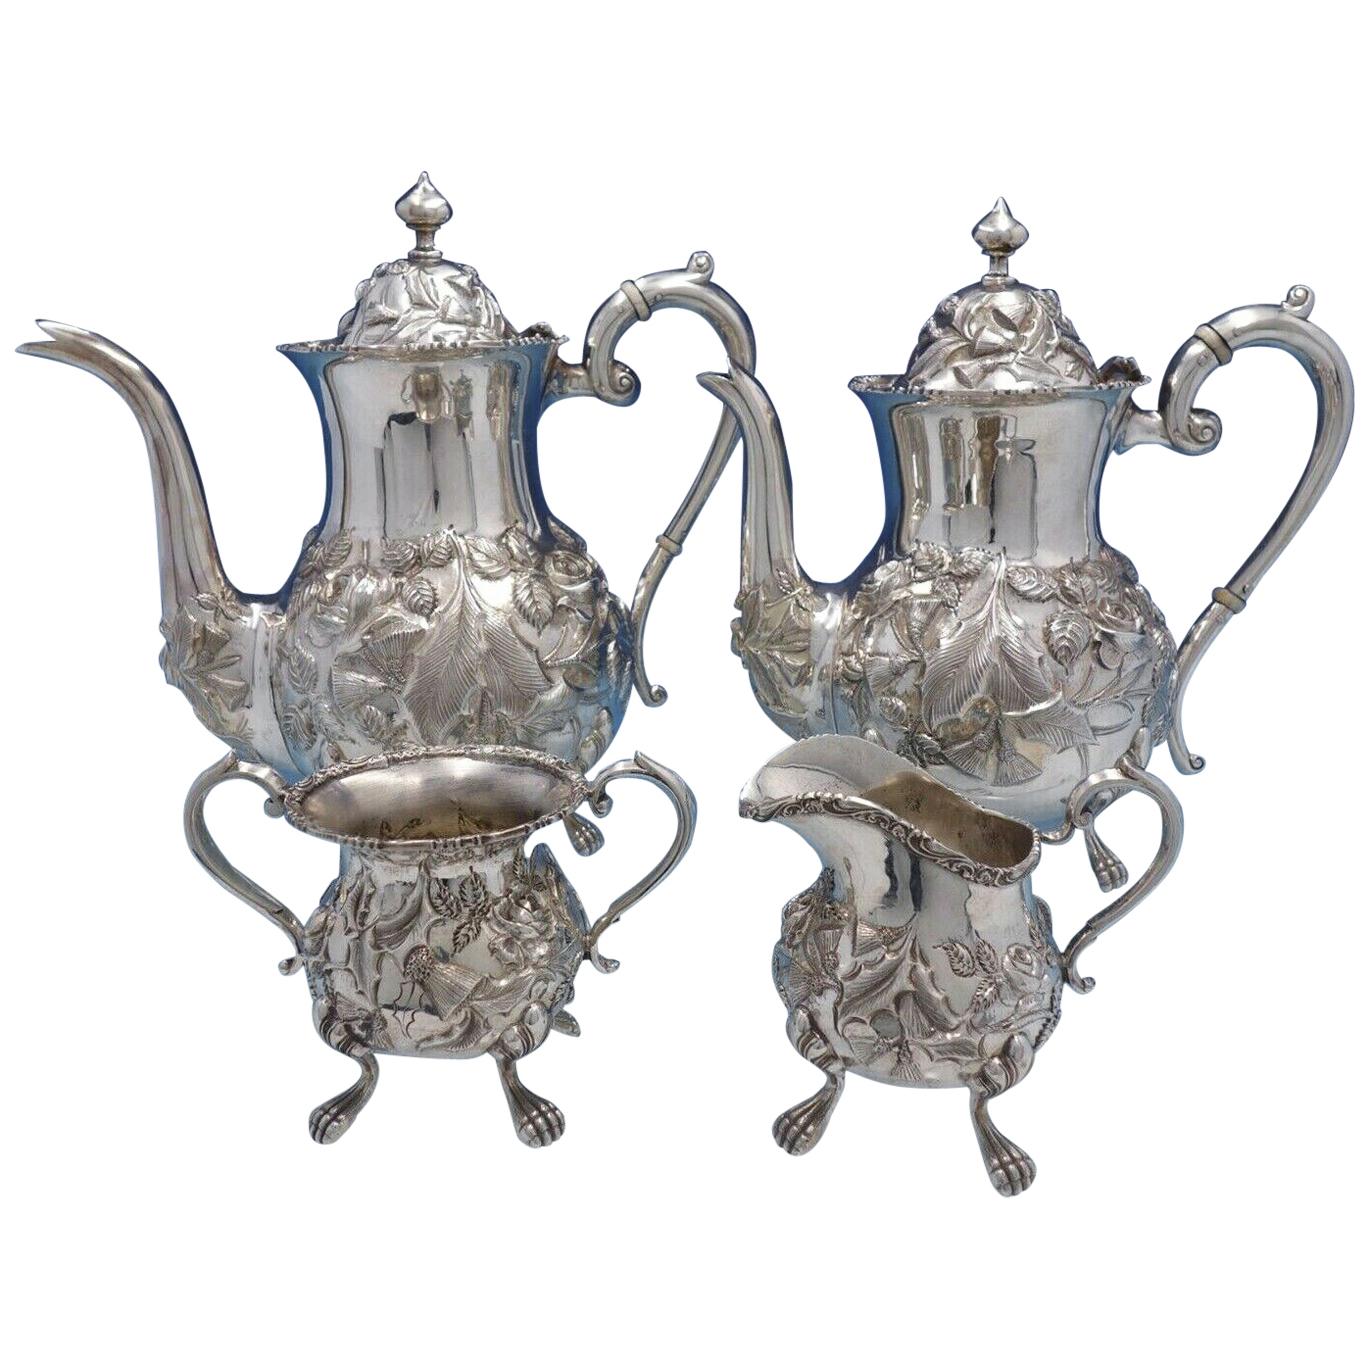 Baltimore Rose by Schofield Sterling Silver 4 Piece Tea Set #1295